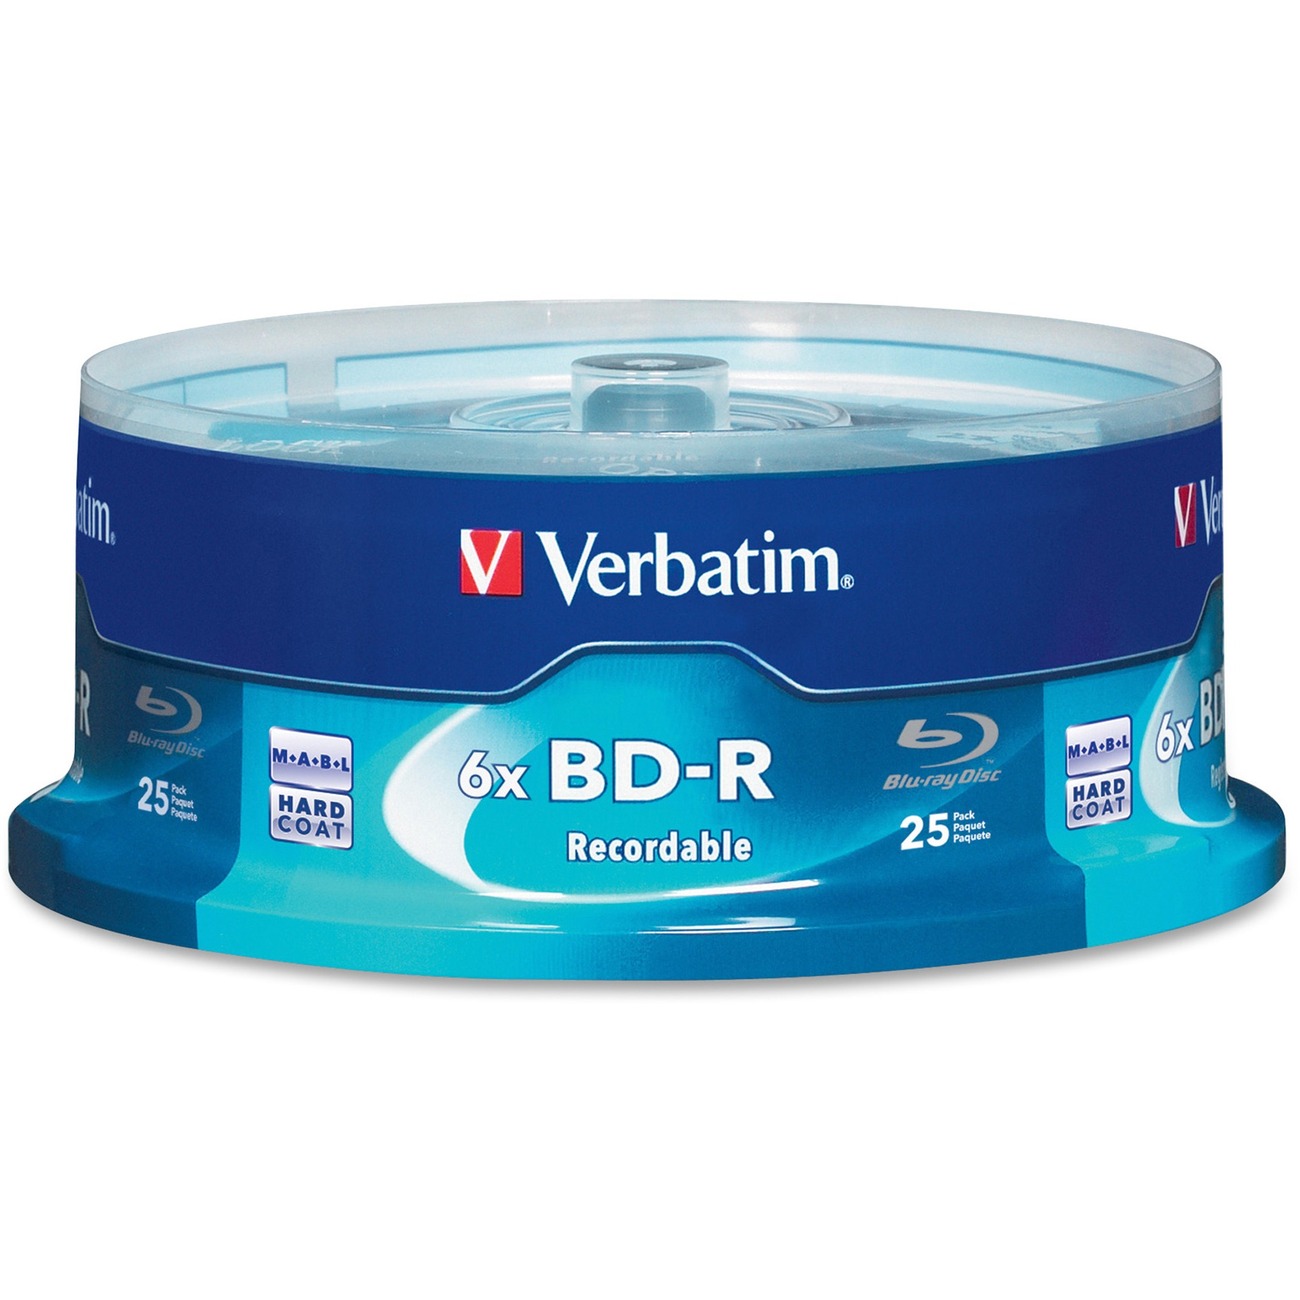  Verbatim Music CD-R 80 Minute 700 MB Blank Recordable Audio  Discs 25pk Spindle, Silver : Electronics